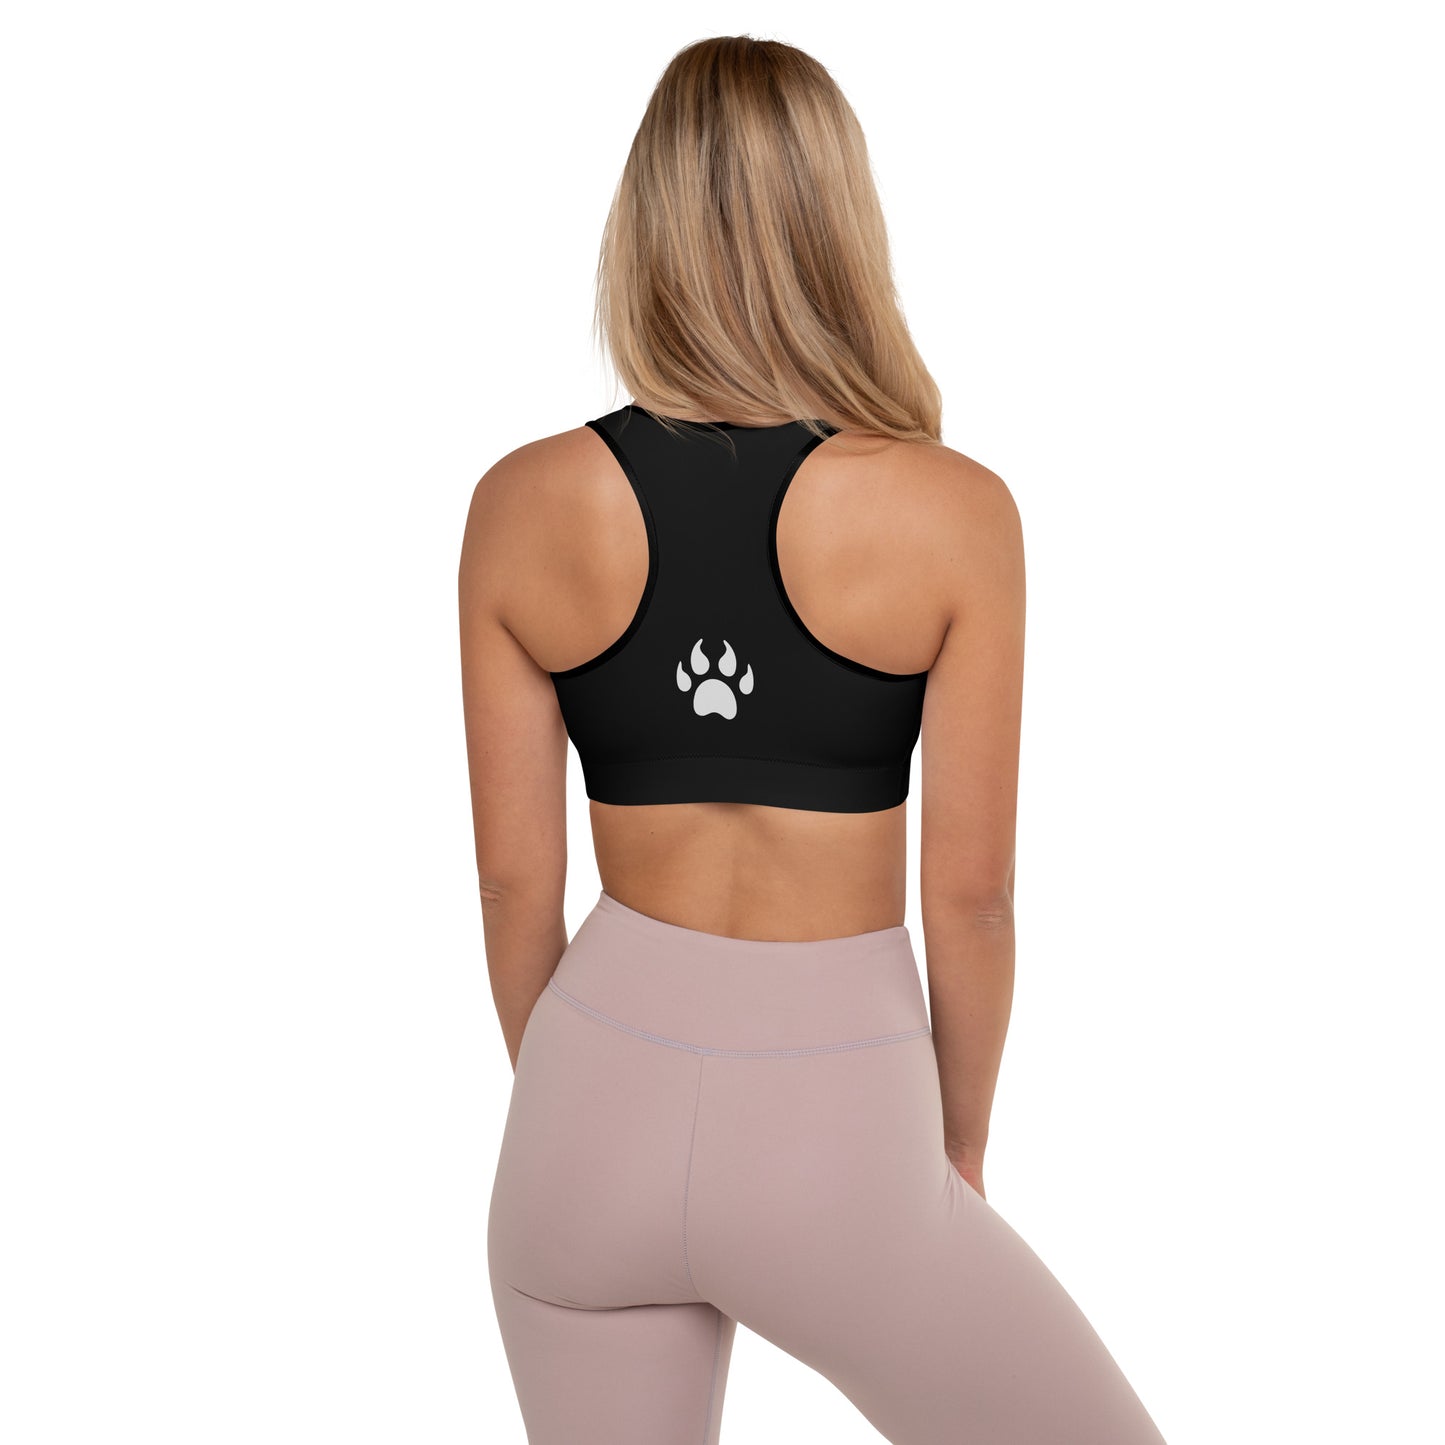 the back view of a woman wearing a Sweetest Paw Padded Sports Bra Black with a paw print on it.